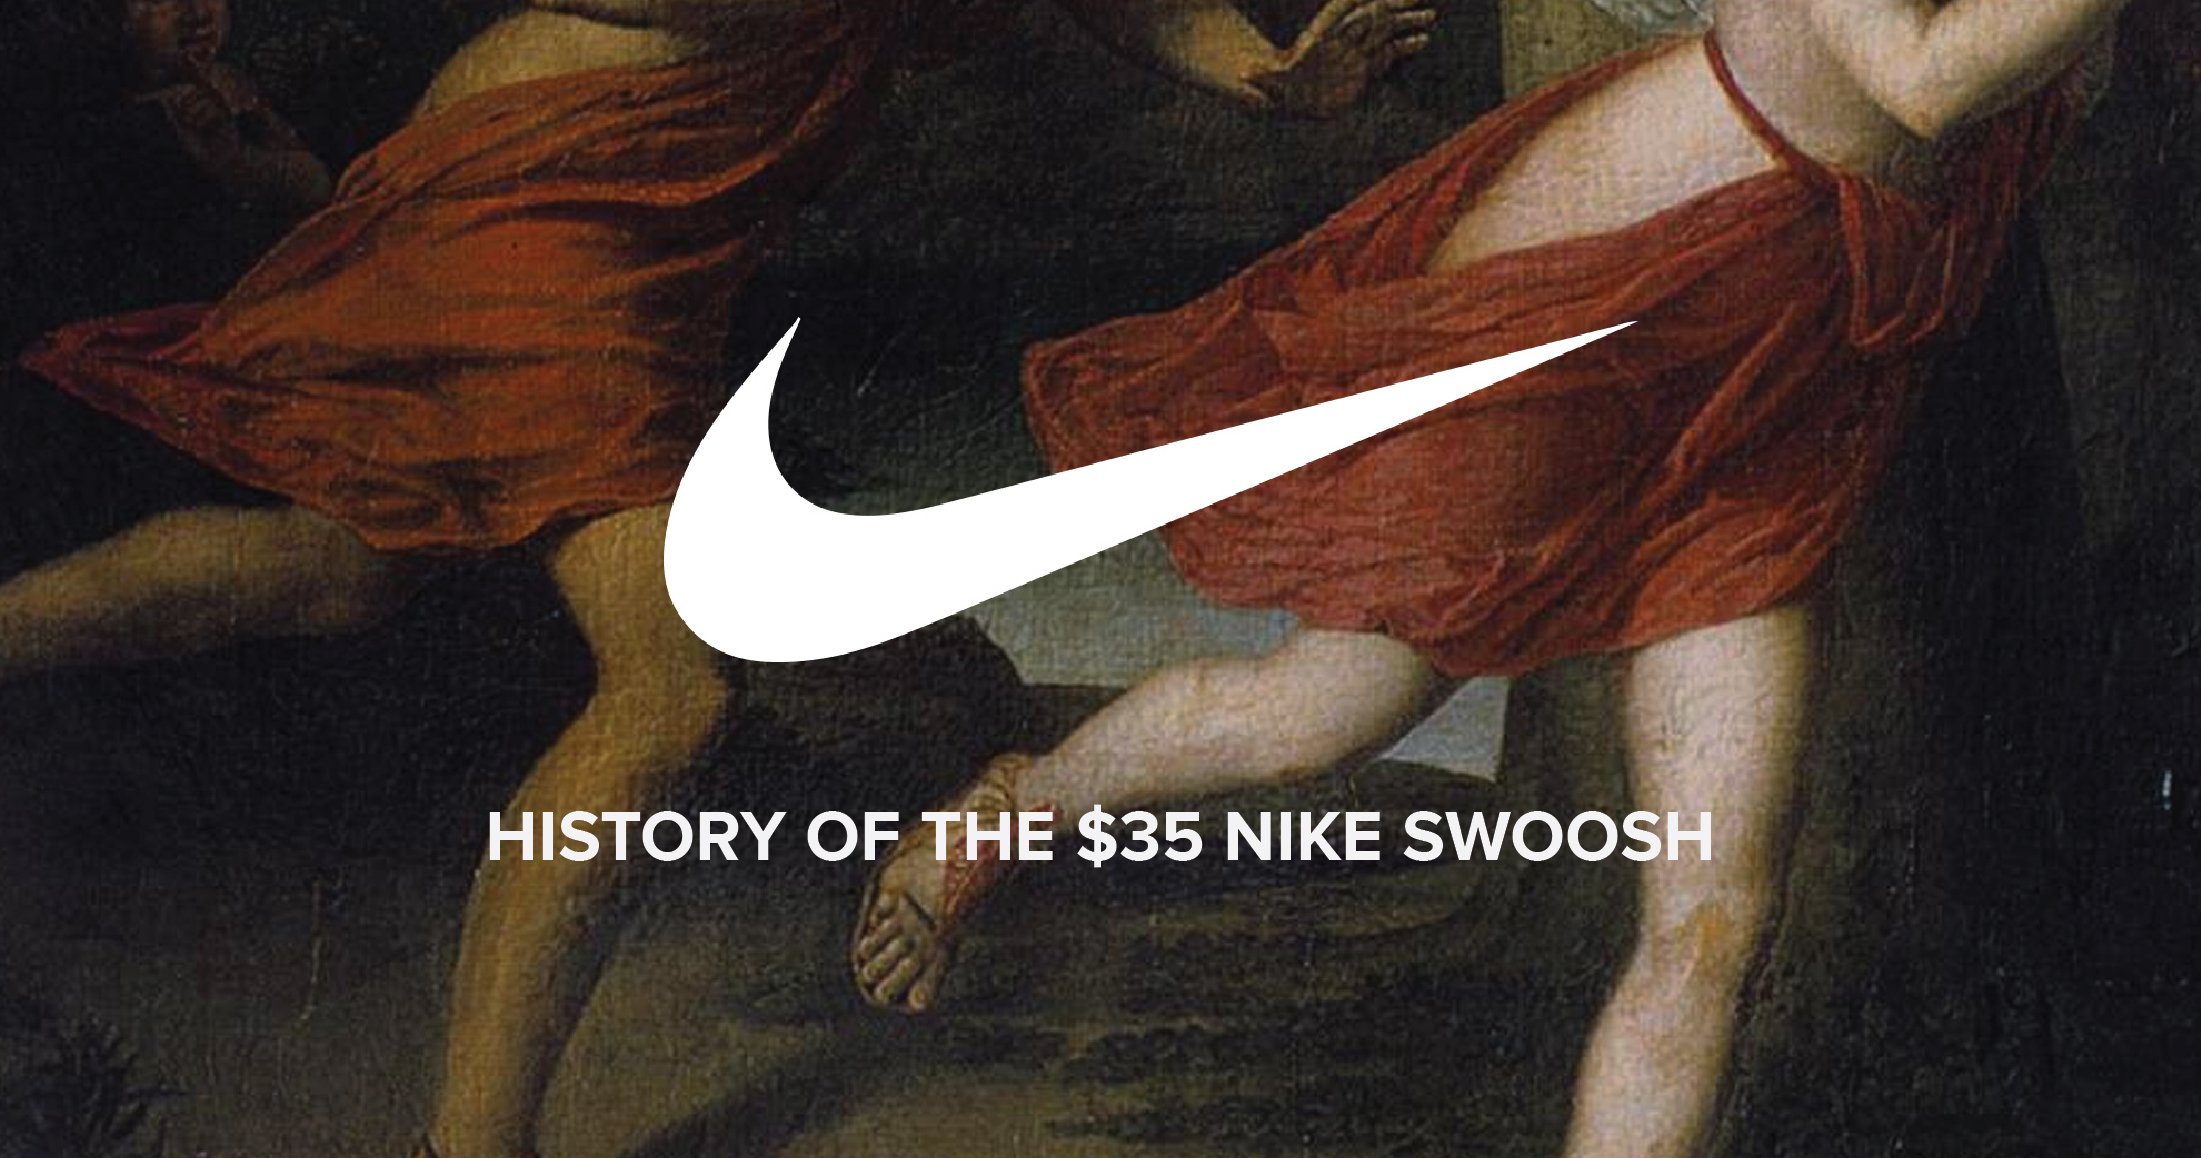 The Origin of Just Do It and the Nike Swoosh